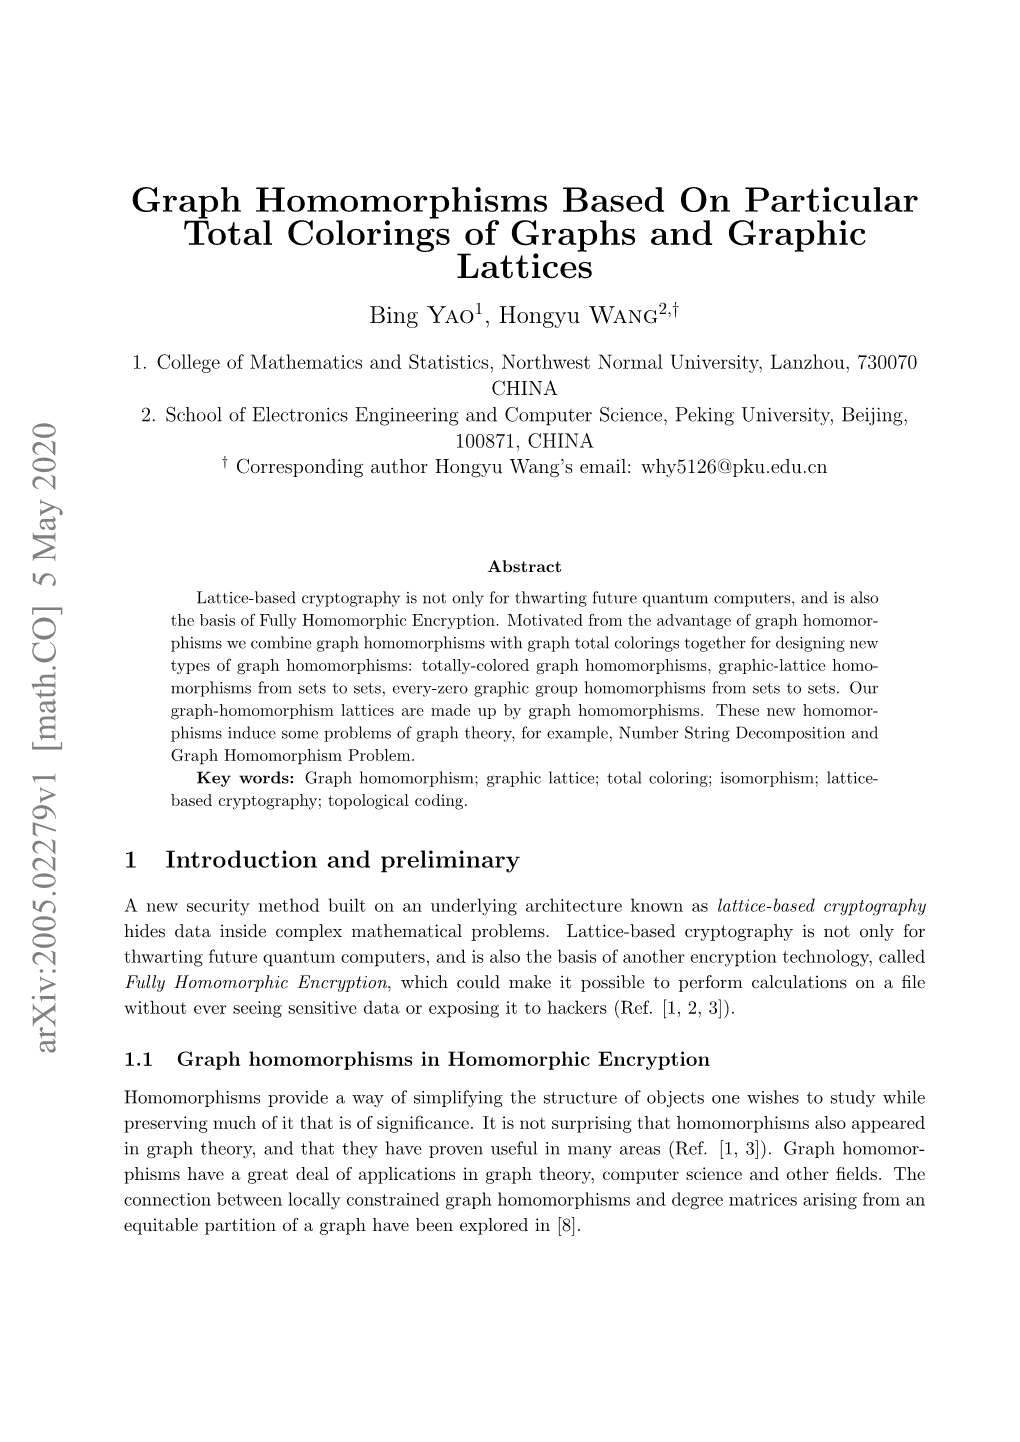 Graph Homomorphisms Based on Particular Total Colorings of Graphs and Graphic Lattices Bing Yao1, Hongyu Wang2,†